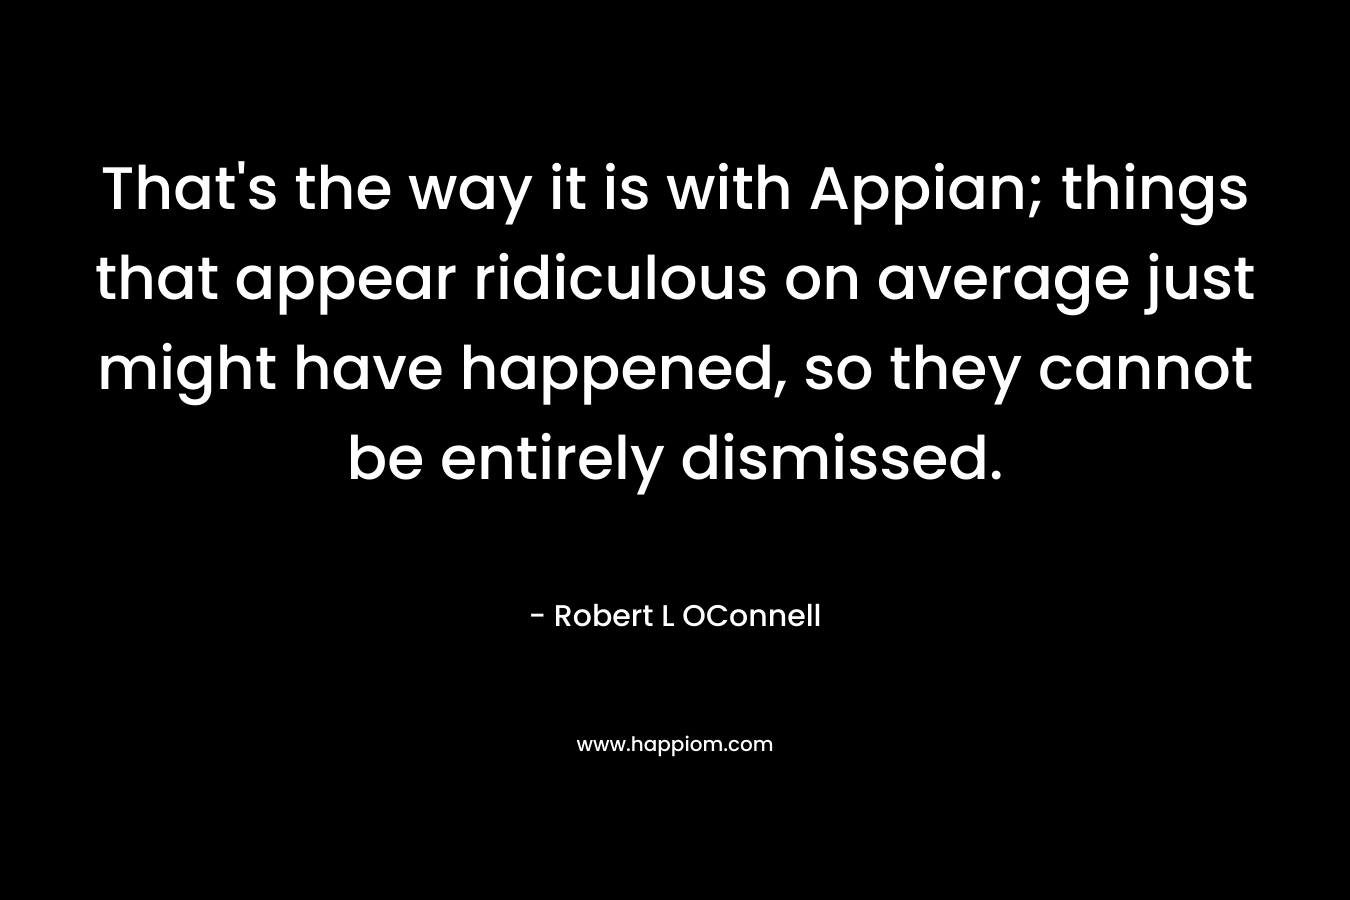 That's the way it is with Appian; things that appear ridiculous on average just might have happened, so they cannot be entirely dismissed.